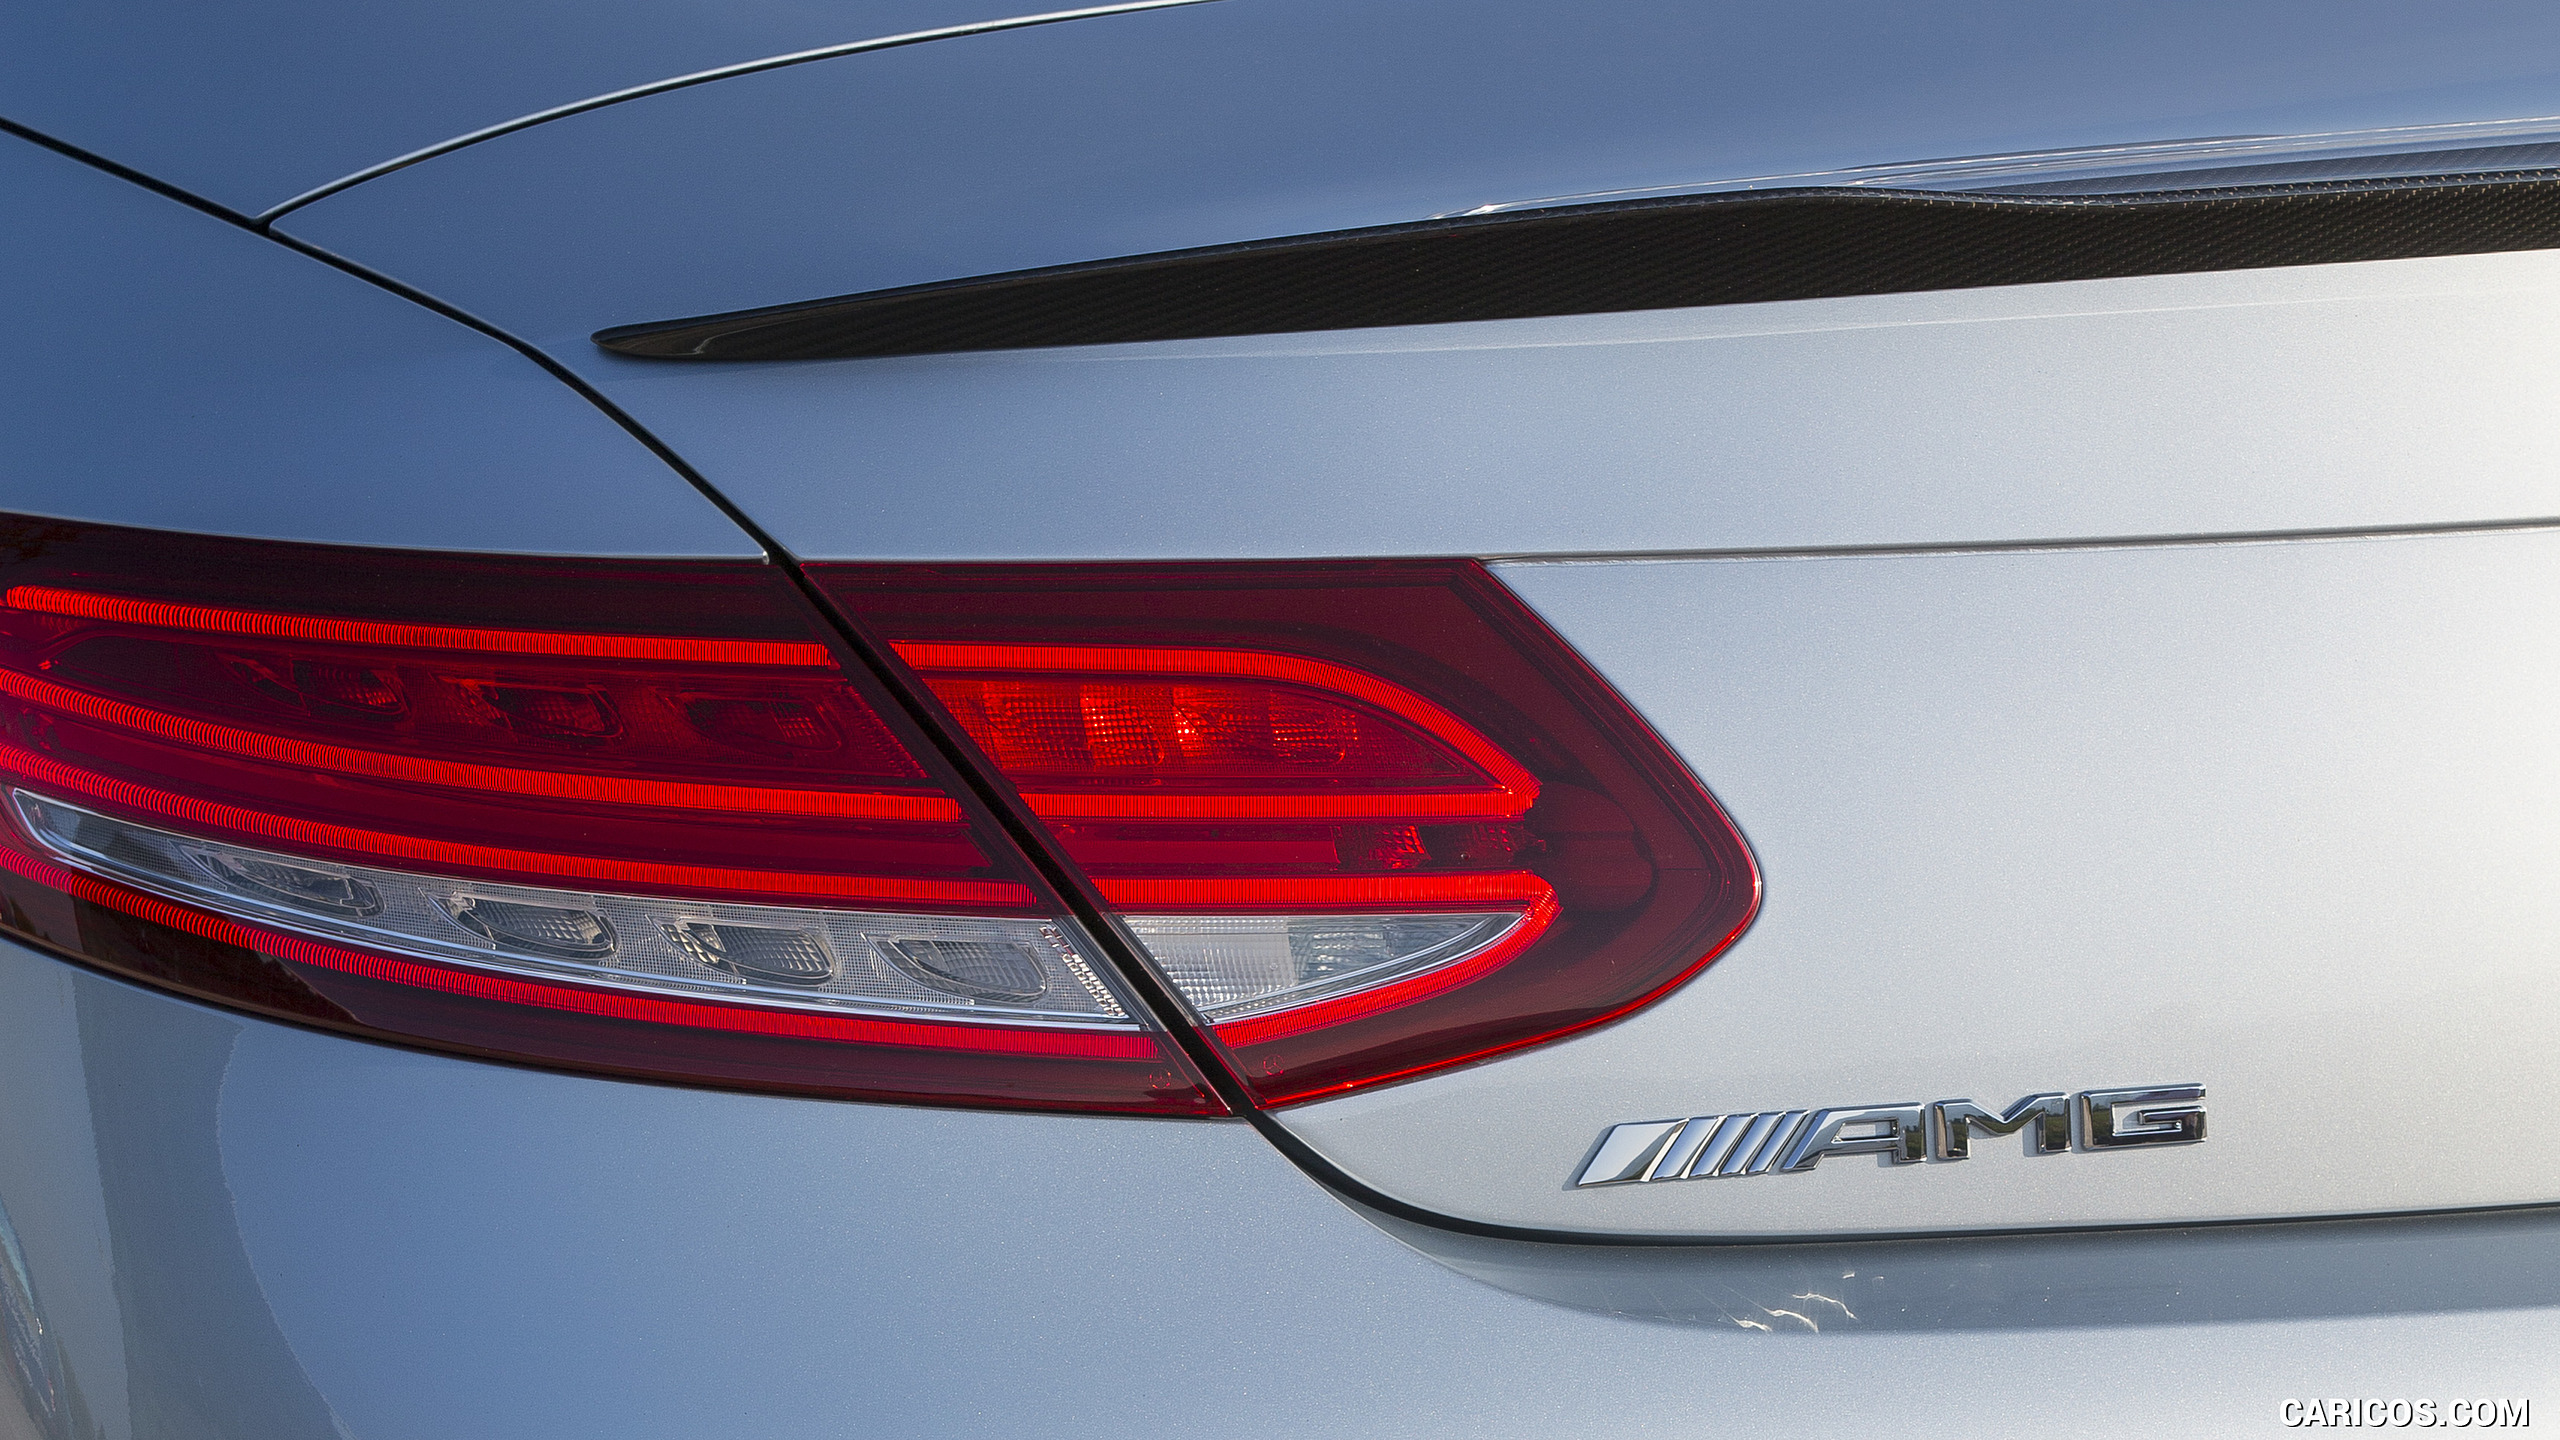 2017 Mercedes-AMG C43 Cabriolet - Tail Light, #78 of 97